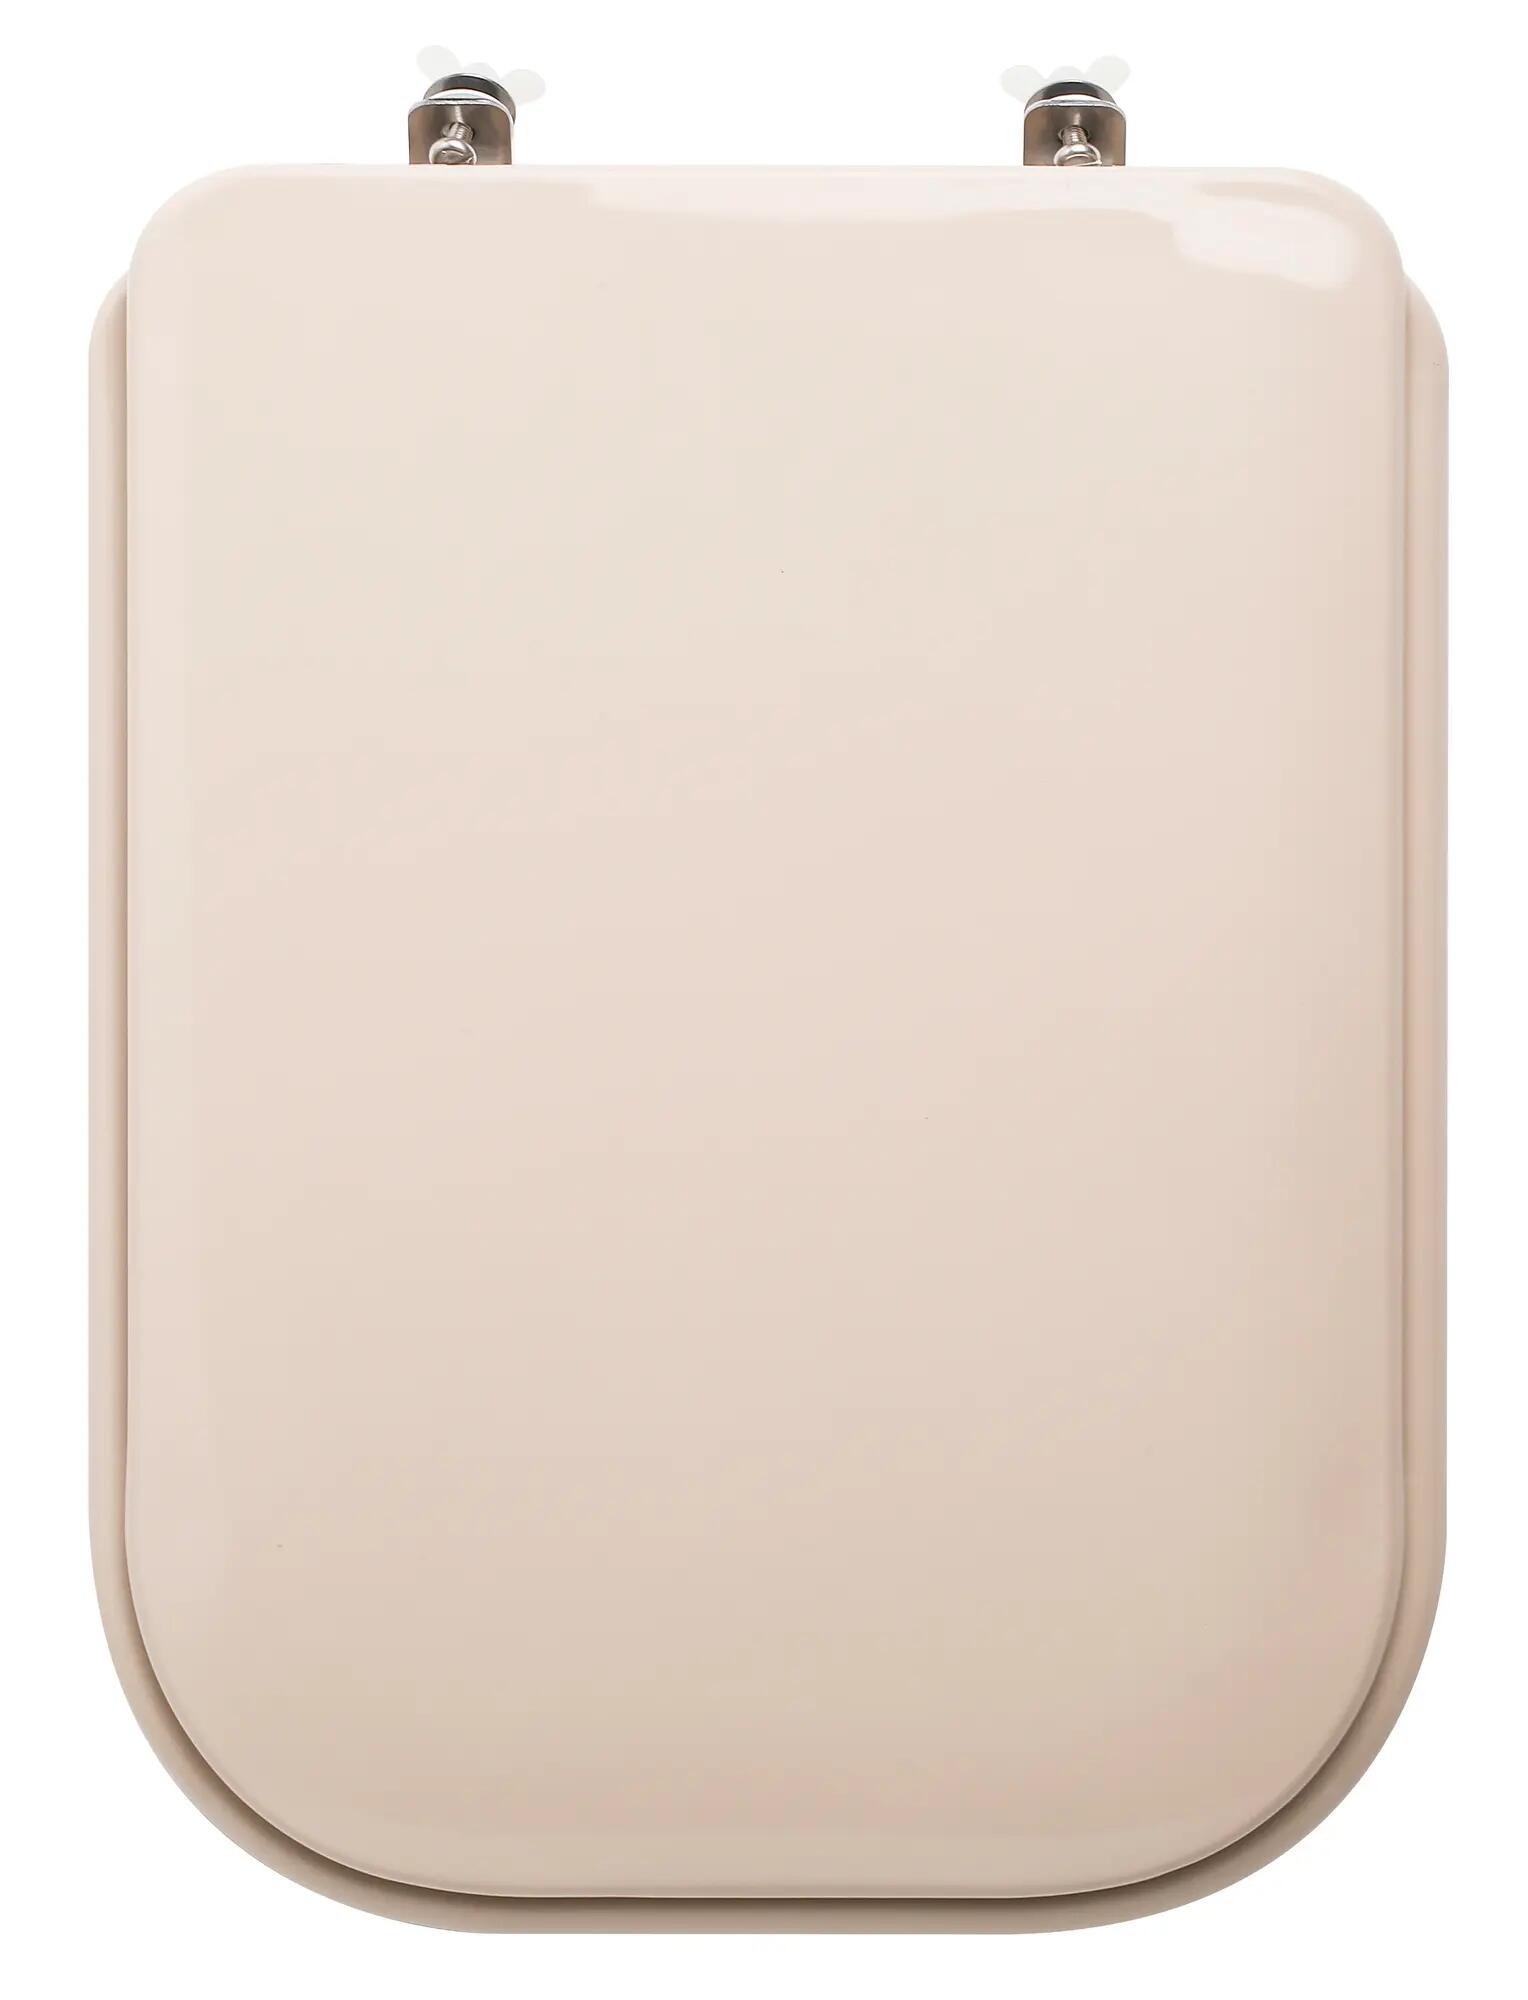 Tapa wc lunel compatible gala 2000 beige